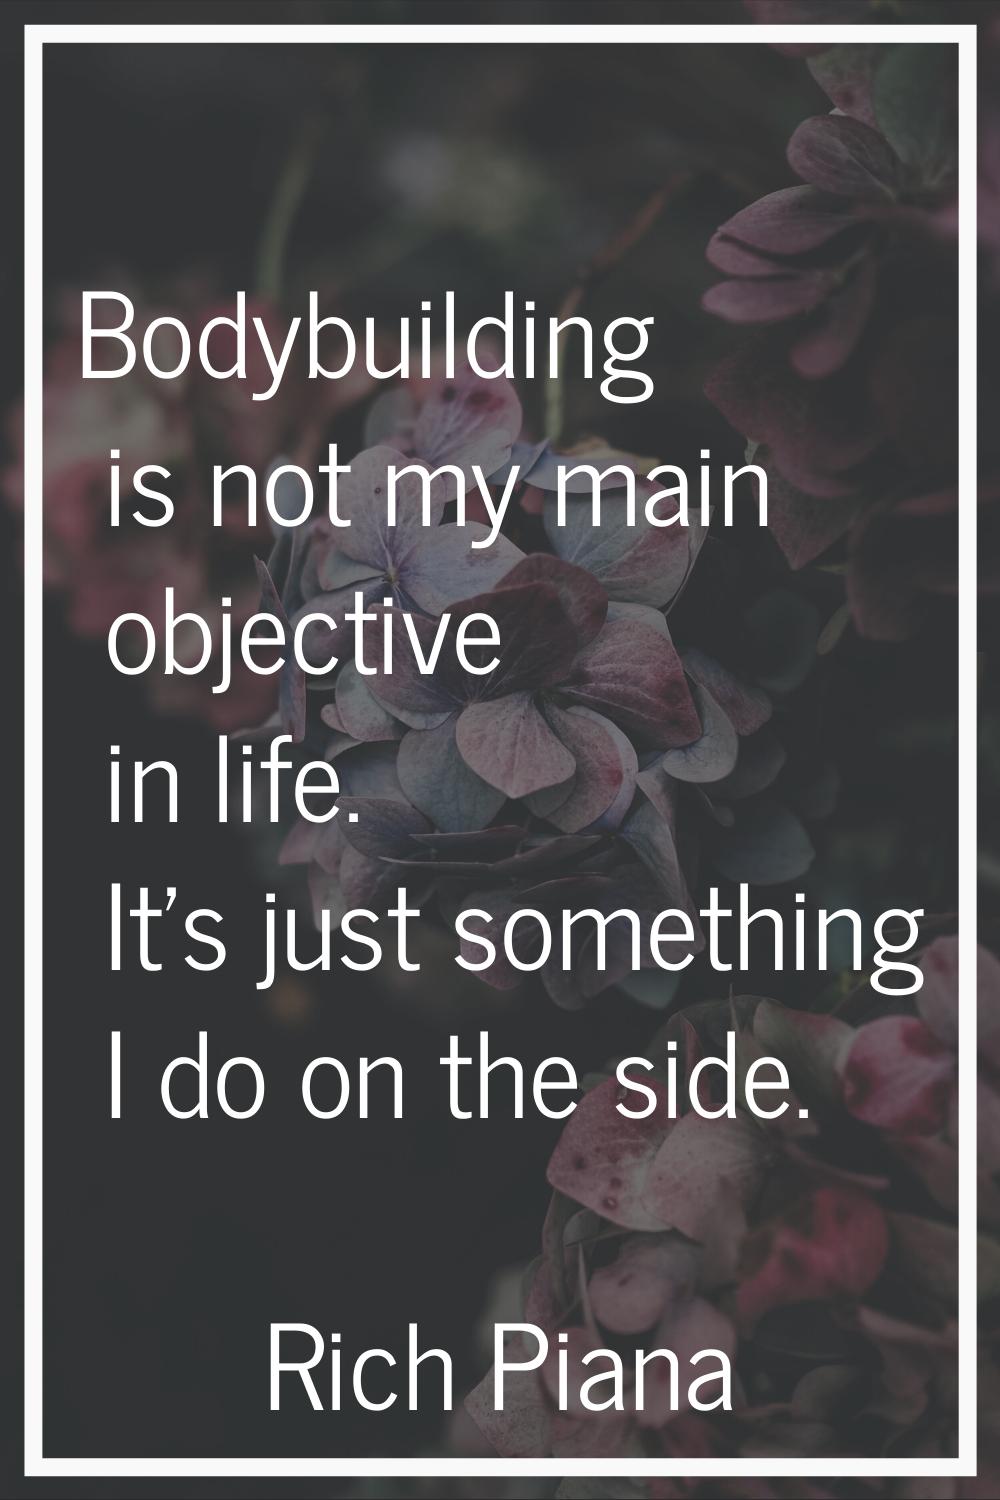 Bodybuilding is not my main objective in life. It's just something I do on the side.